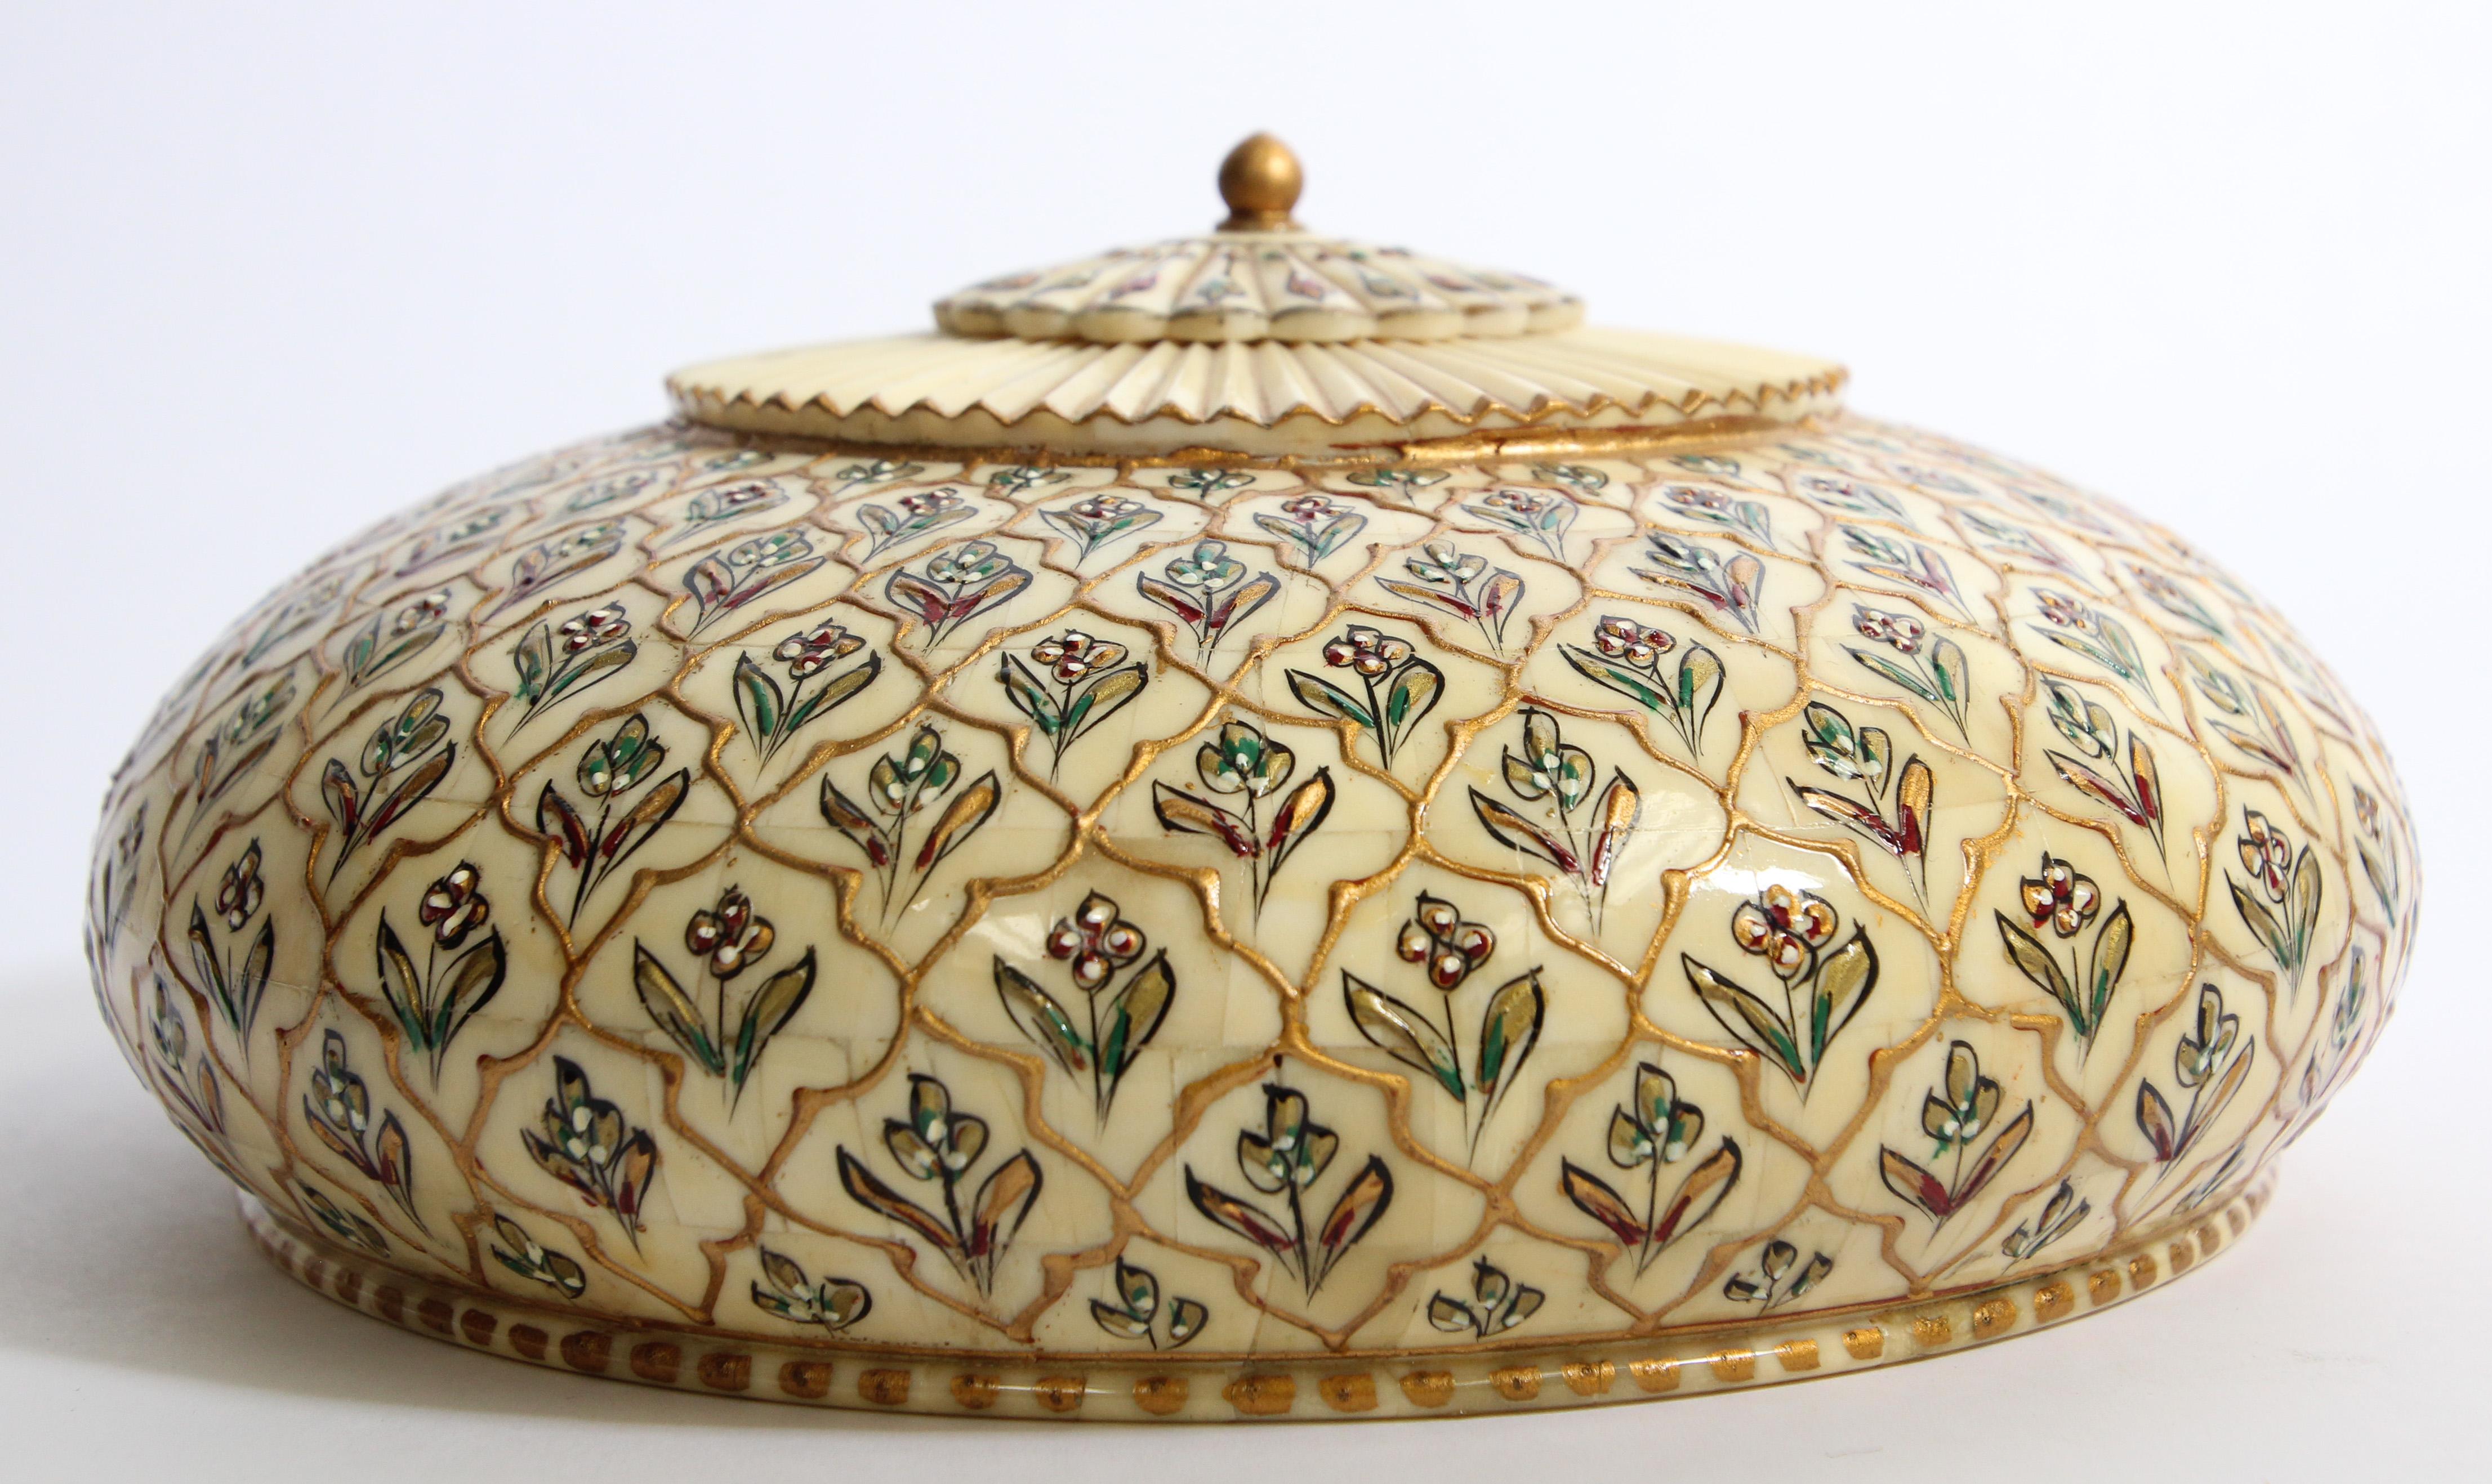 Antique collectible opium container Mughal Art round lidded box.
This stylish lidded box is veneered with ivory color white bone sections engraved and hand painted with floral Mughal design int he same work as in the Taj Mahal palace..
Beautiful